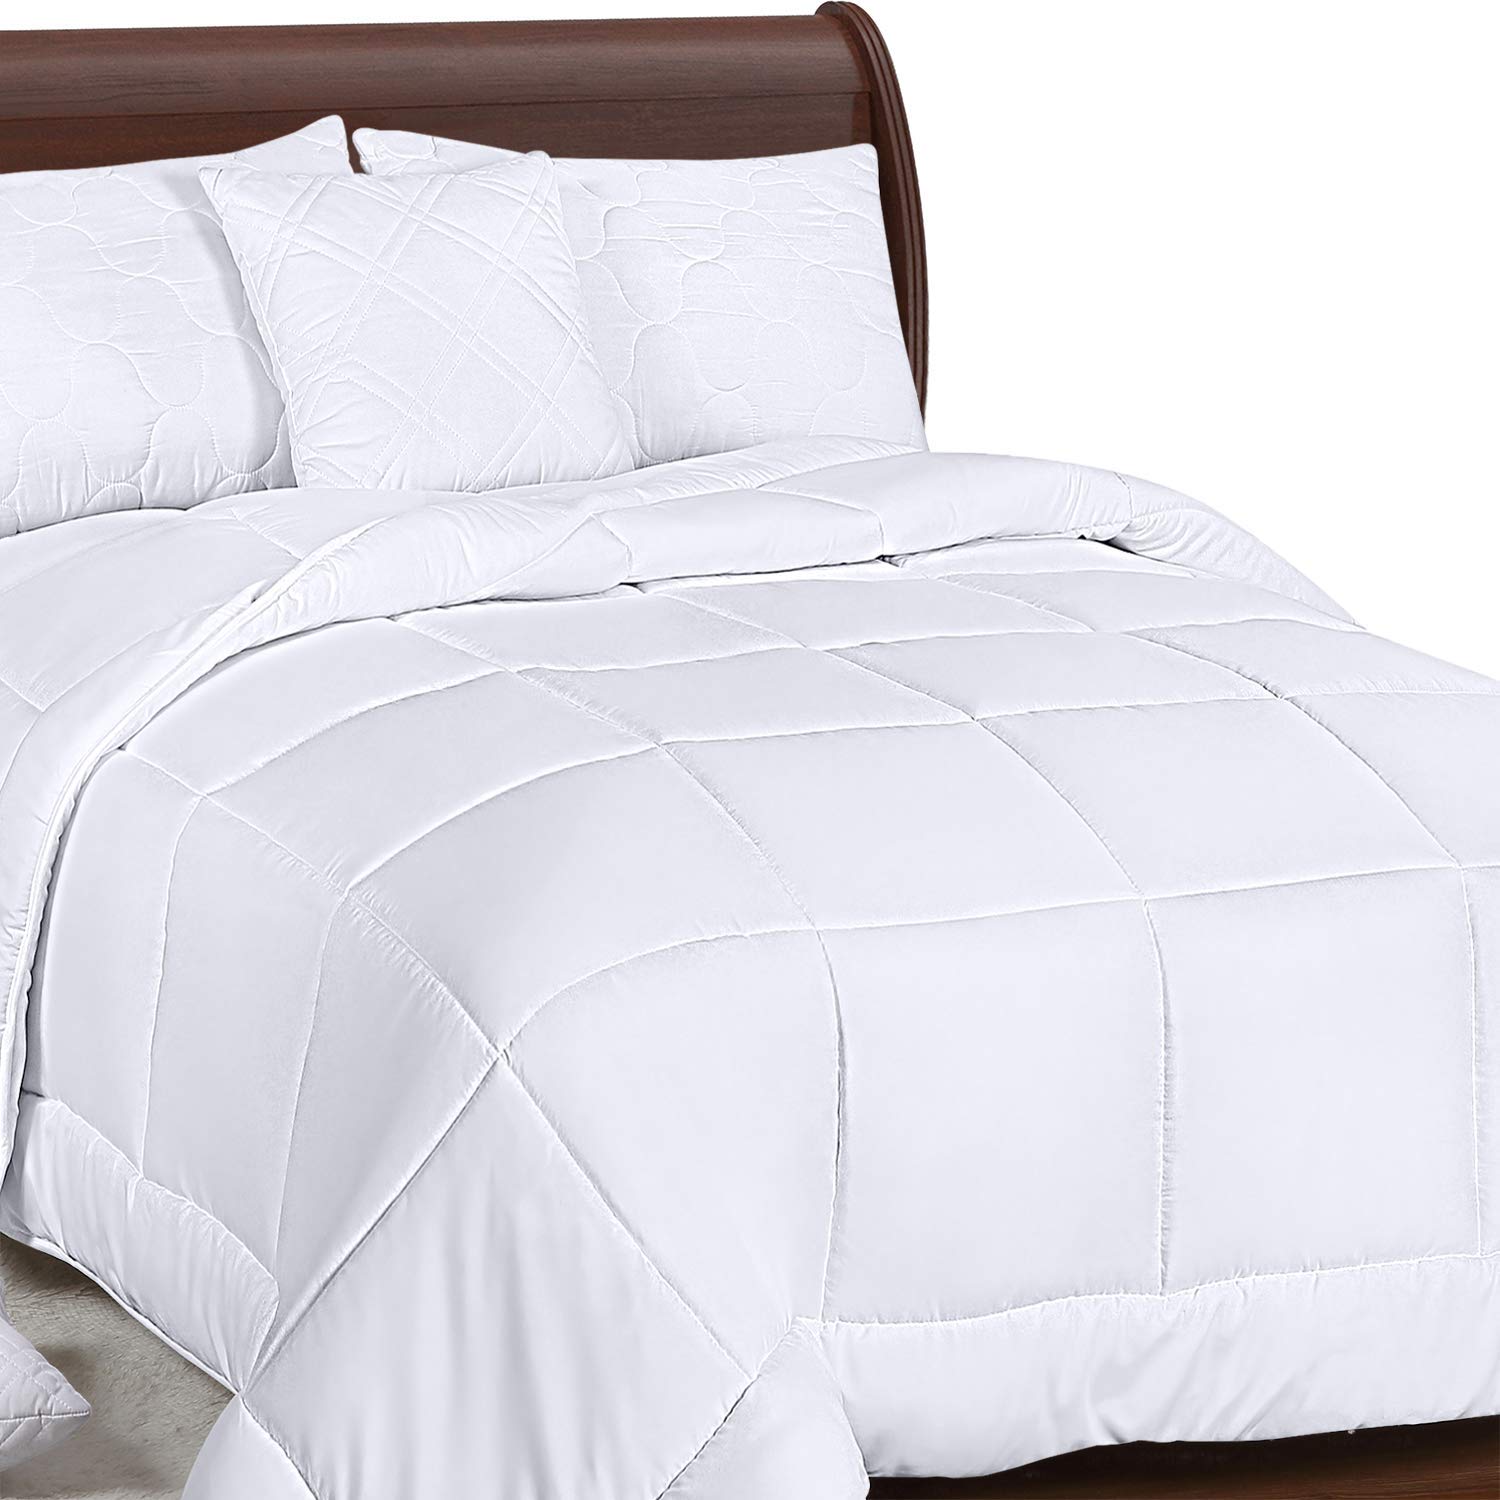  Utopia Bedding All Season Down Alternative Quilted